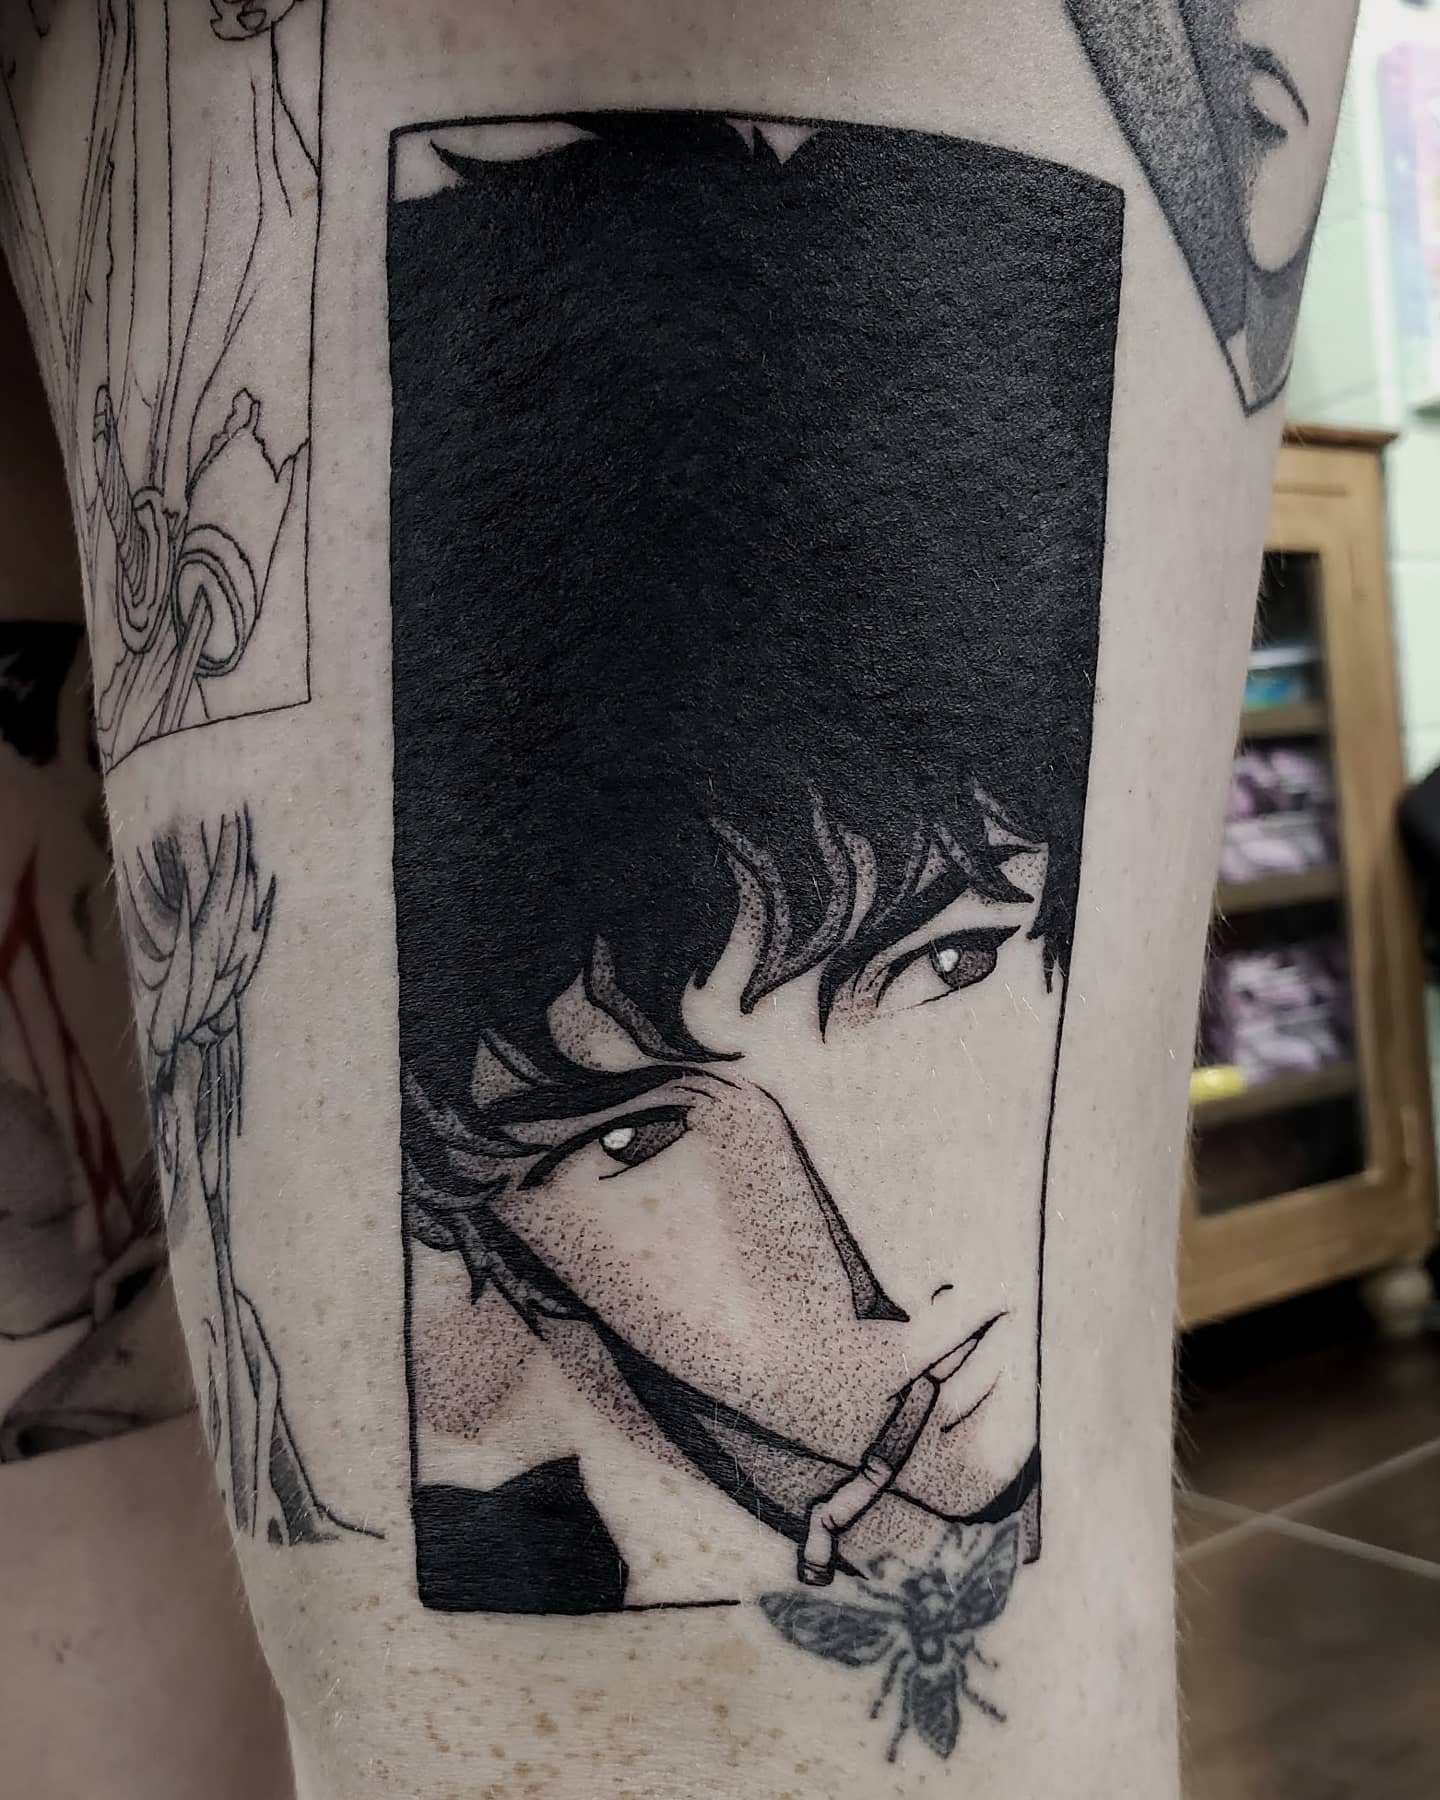 I wanted to show you guys my new tattoo  rcowboybebop